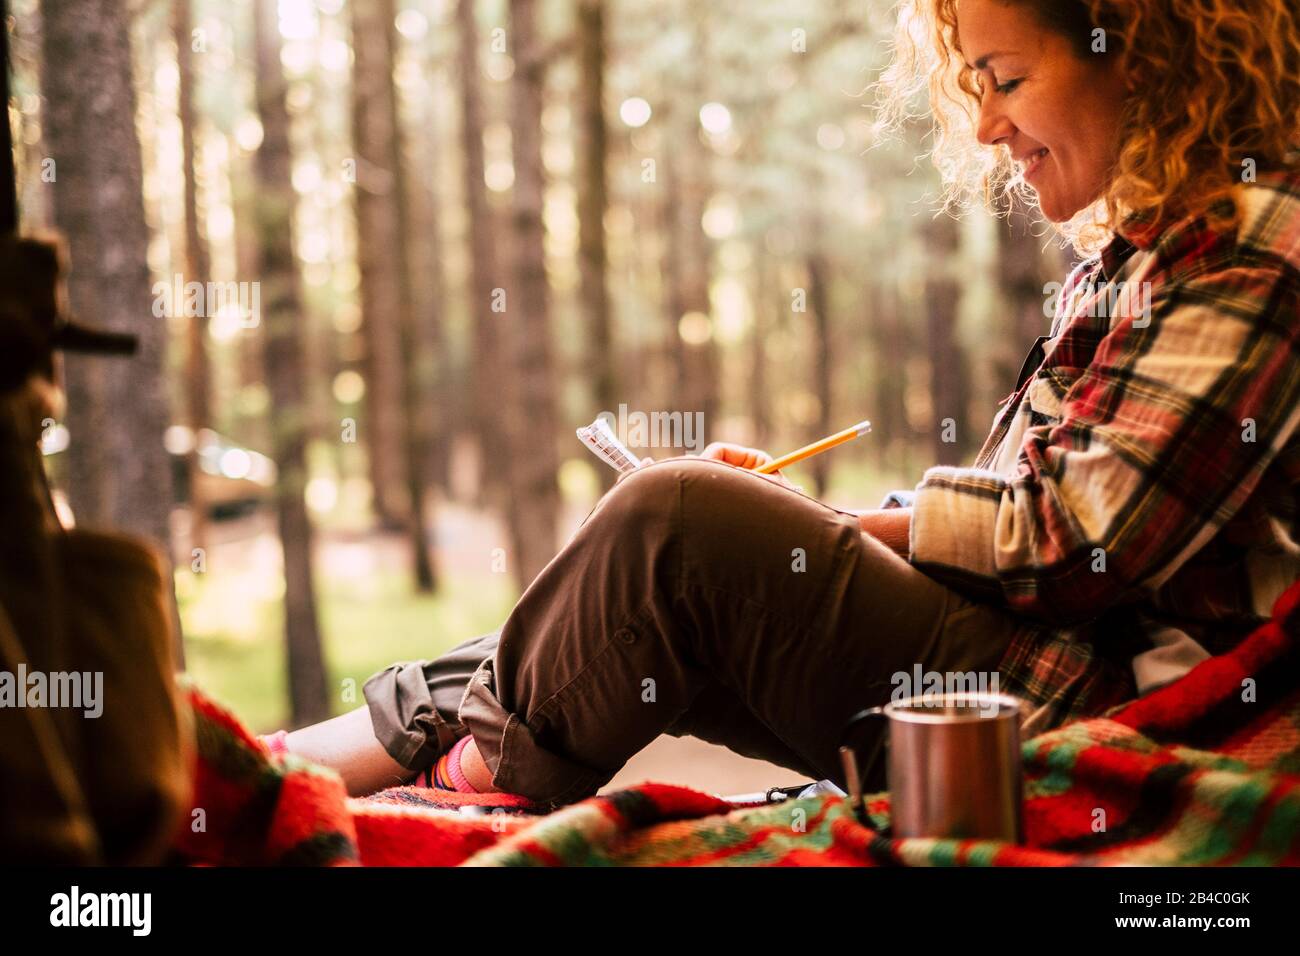 Travel alternative and wanderlust lifestyle people - beautiful young woman sit down ina tent with scenic forest outdoor in background - adventure and environment concept for free hipster female Stock Photo